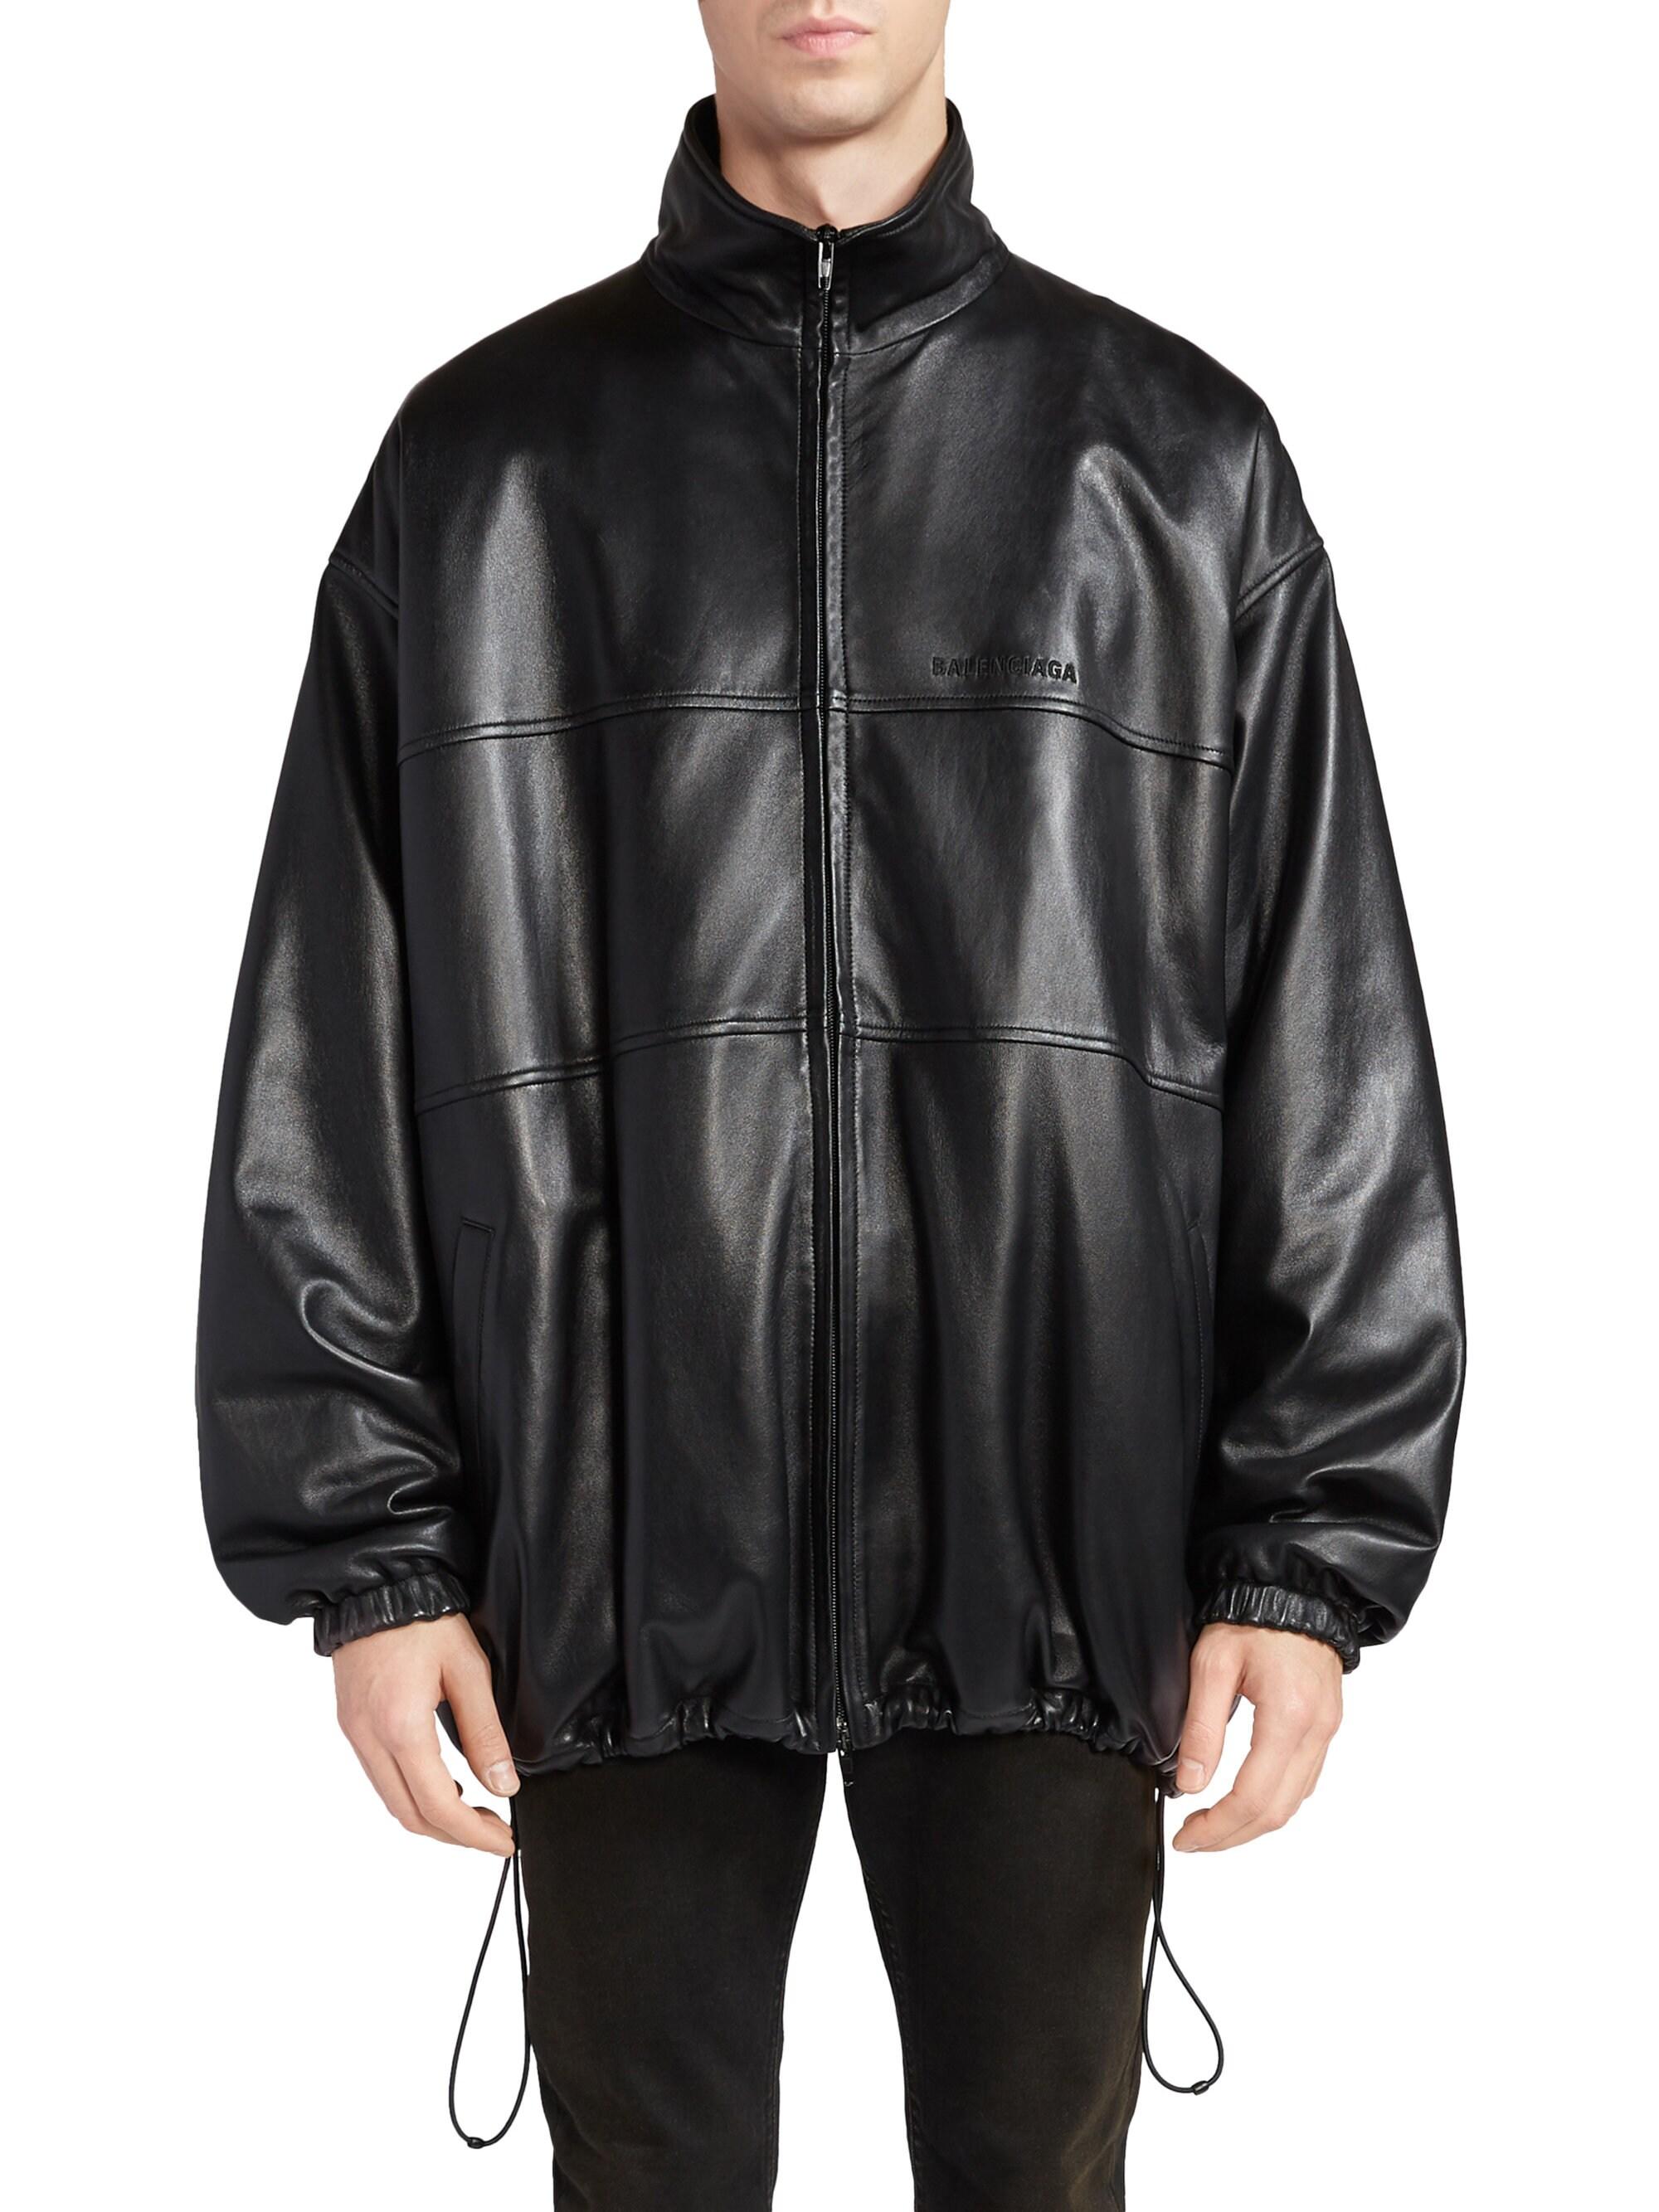 Balenciaga Oversized Leather Track Jacket in Black for Men Lyst